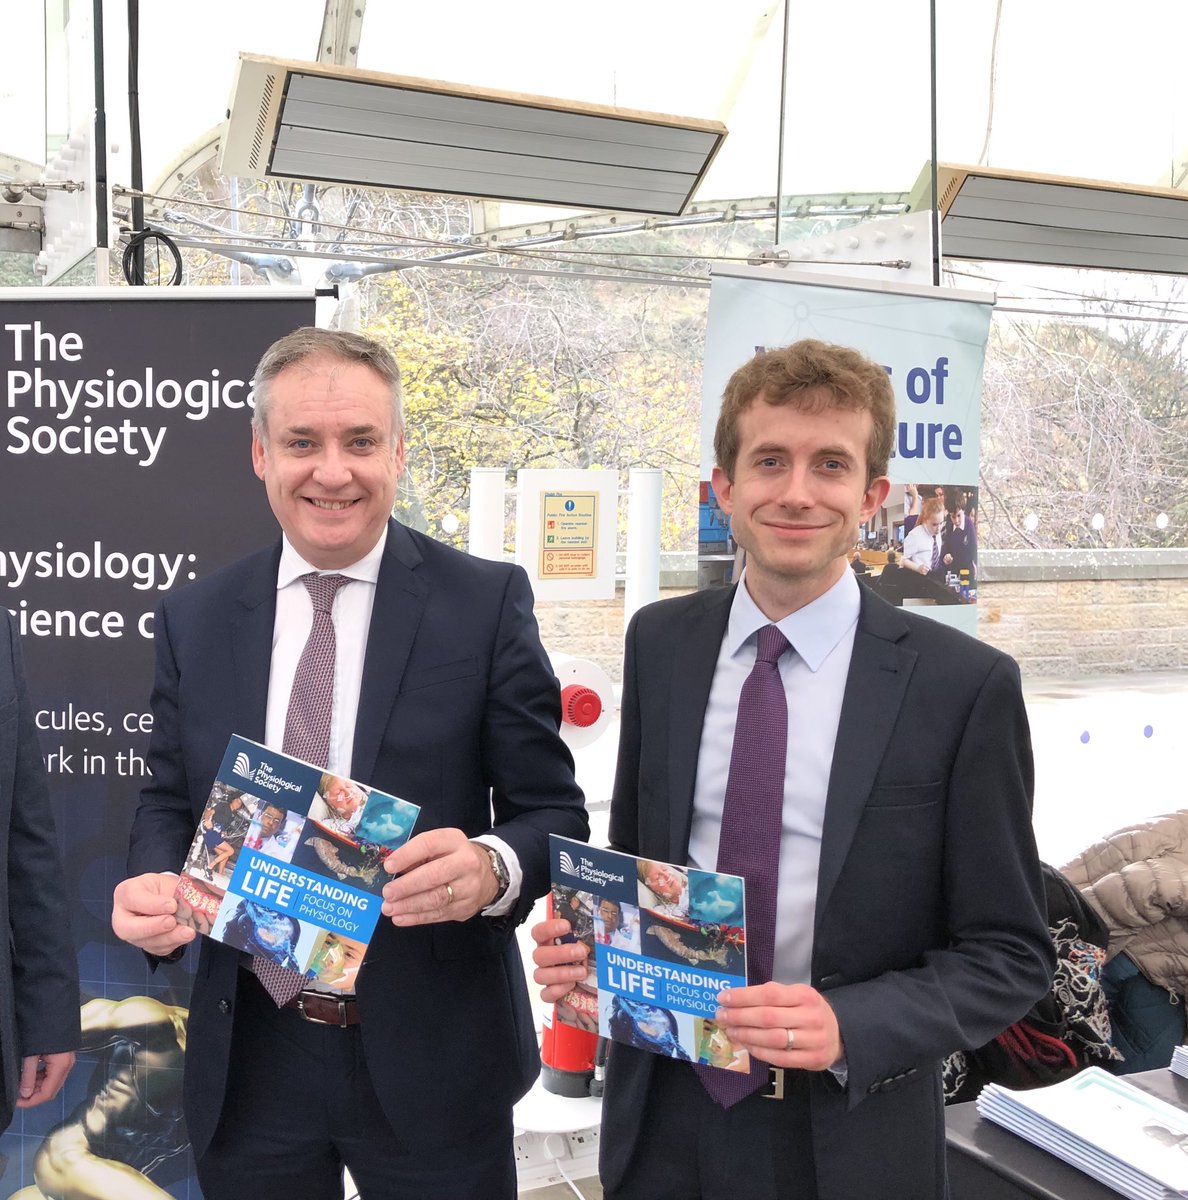 Thanks to Minister for Further Education, Higher Education and Science @RichardLochhead for taking the time to discuss why studying physiology opens doors to so many exciting careers. Take a look at our new careers booklet! physoc.org/sites/default/… #satp18